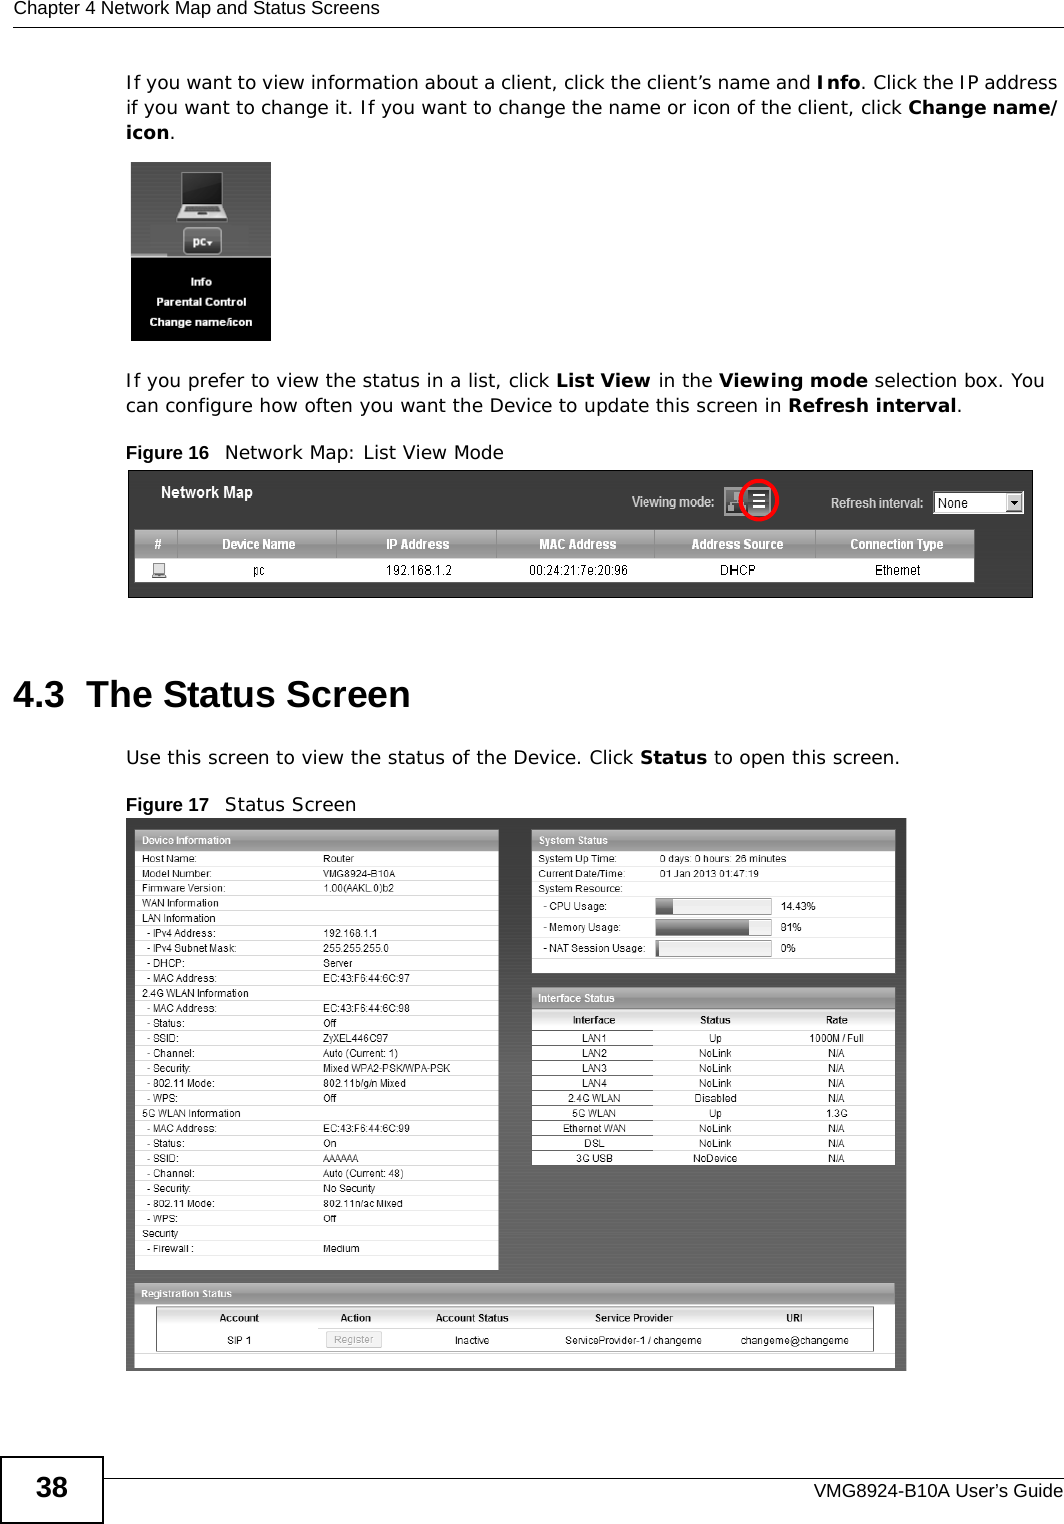 Chapter 4 Network Map and Status ScreensVMG8924-B10A User’s Guide38If you want to view information about a client, click the client’s name and Info. Click the IP address if you want to change it. If you want to change the name or icon of the client, click Change name/icon. If you prefer to view the status in a list, click List View in the Viewing mode selection box. You can configure how often you want the Device to update this screen in Refresh interval.Figure 16   Network Map: List View Mode4.3  The Status Screen Use this screen to view the status of the Device. Click Status to open this screen.Figure 17   Status Screen